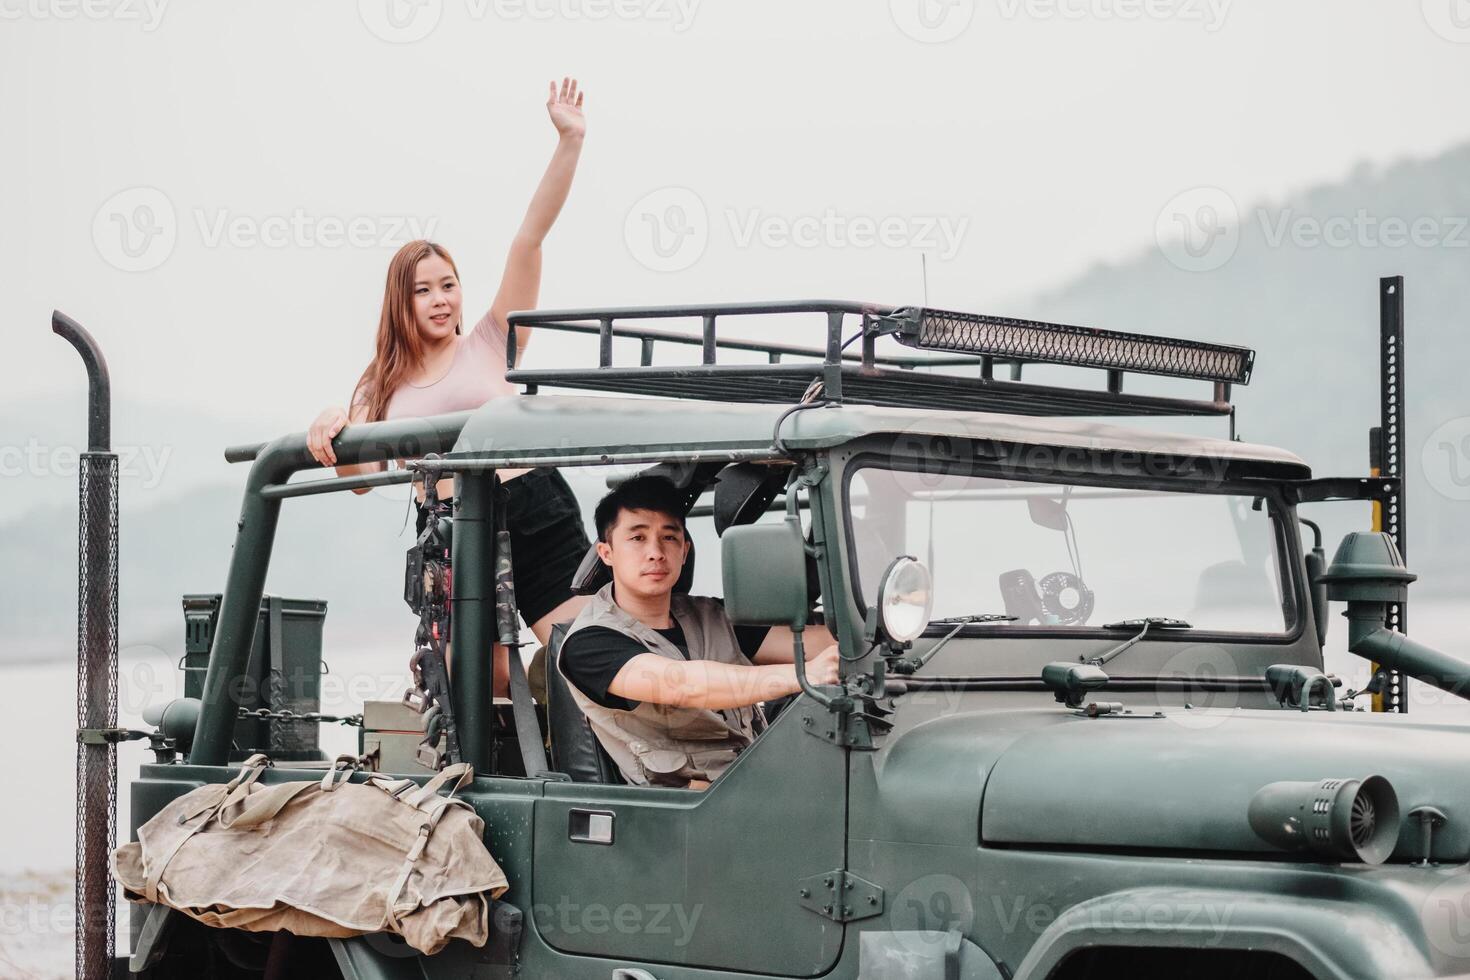 Woman waves cheerfully from the roof of a car while the man looks on, both ready for their next adventure on a road trip. photo